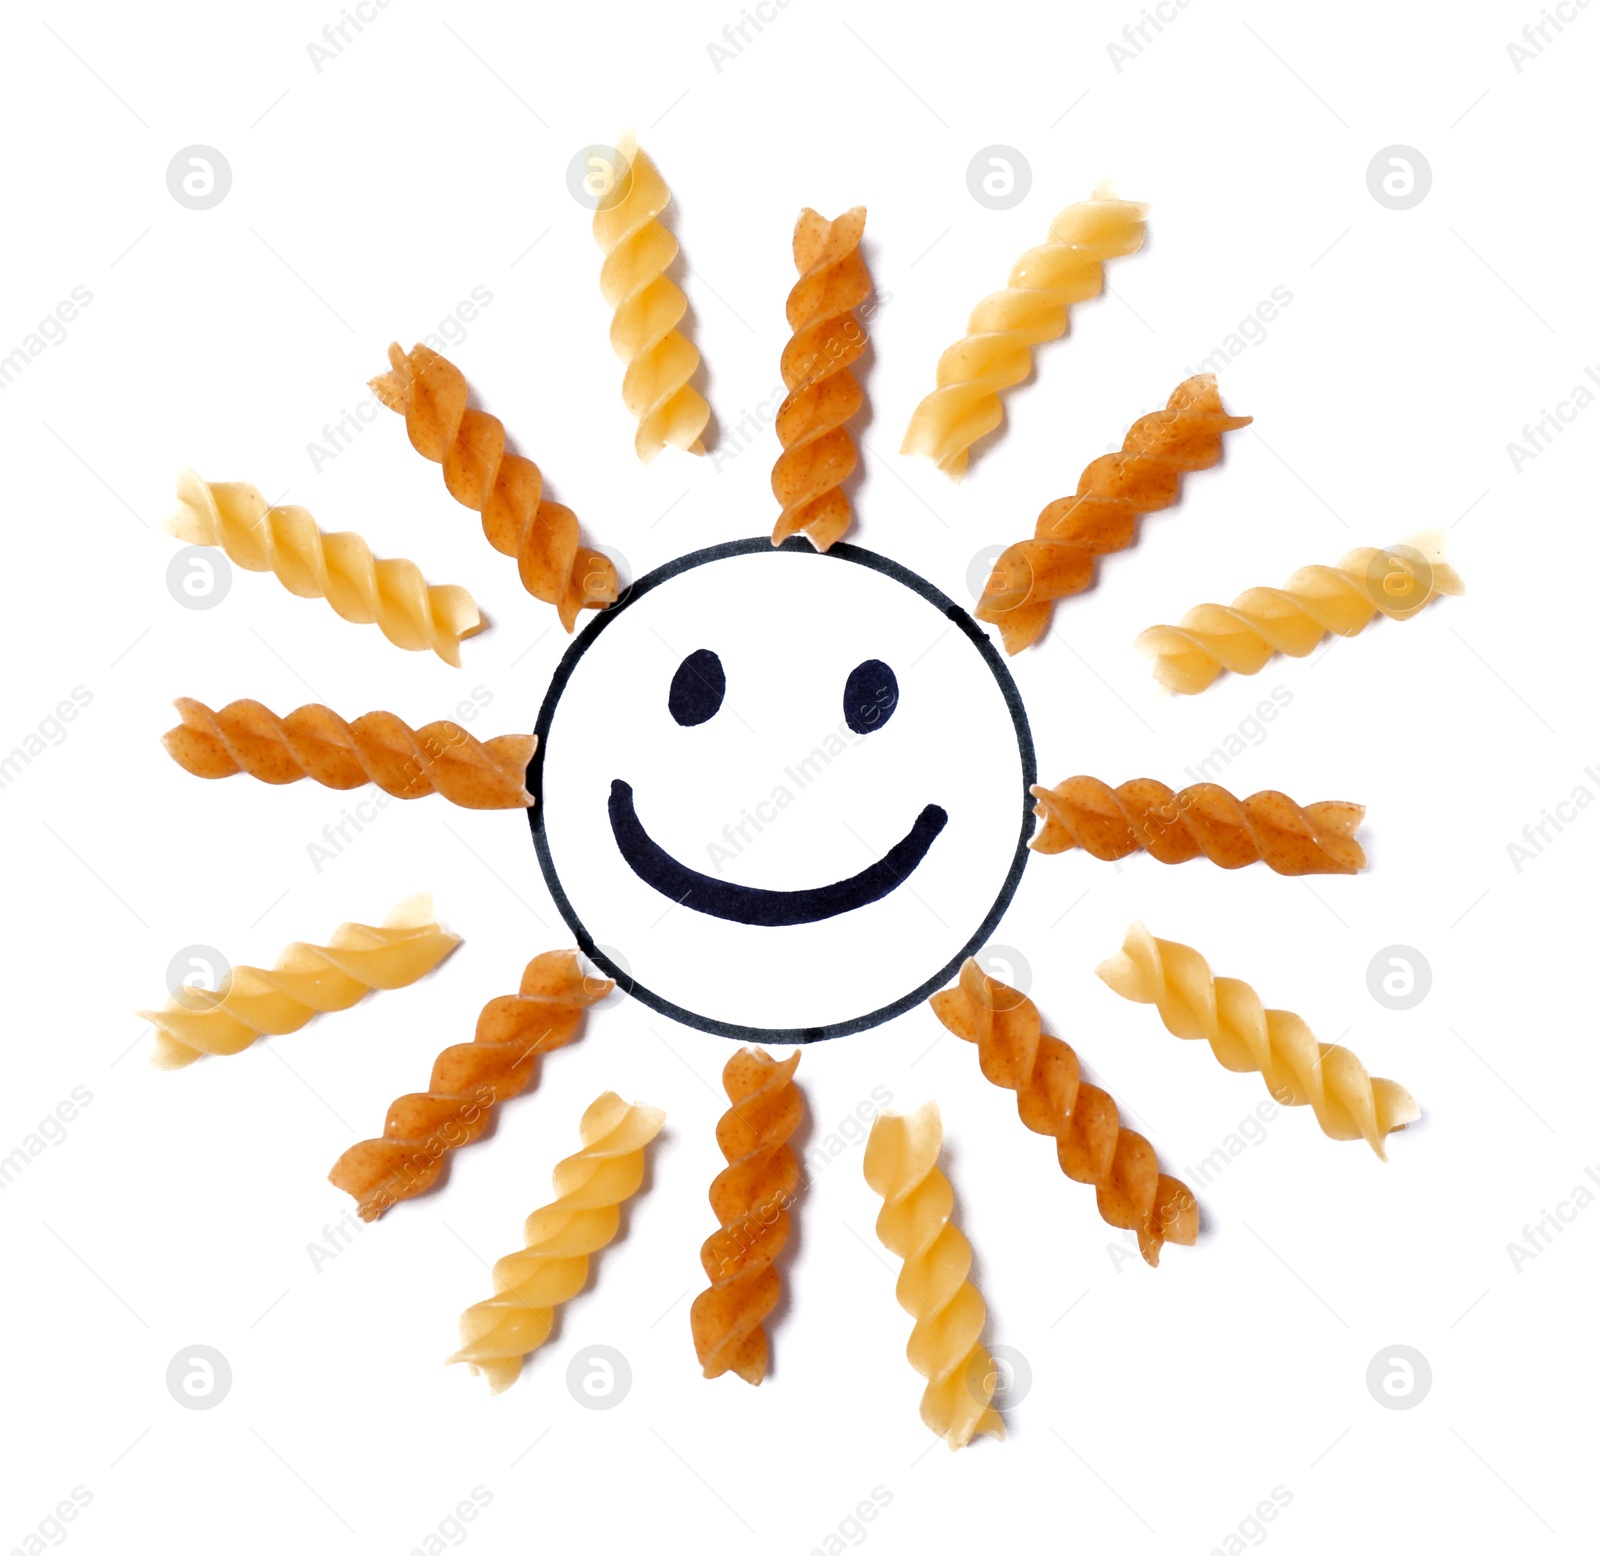 Photo of Sun made with fusilli pasta on white background, top view